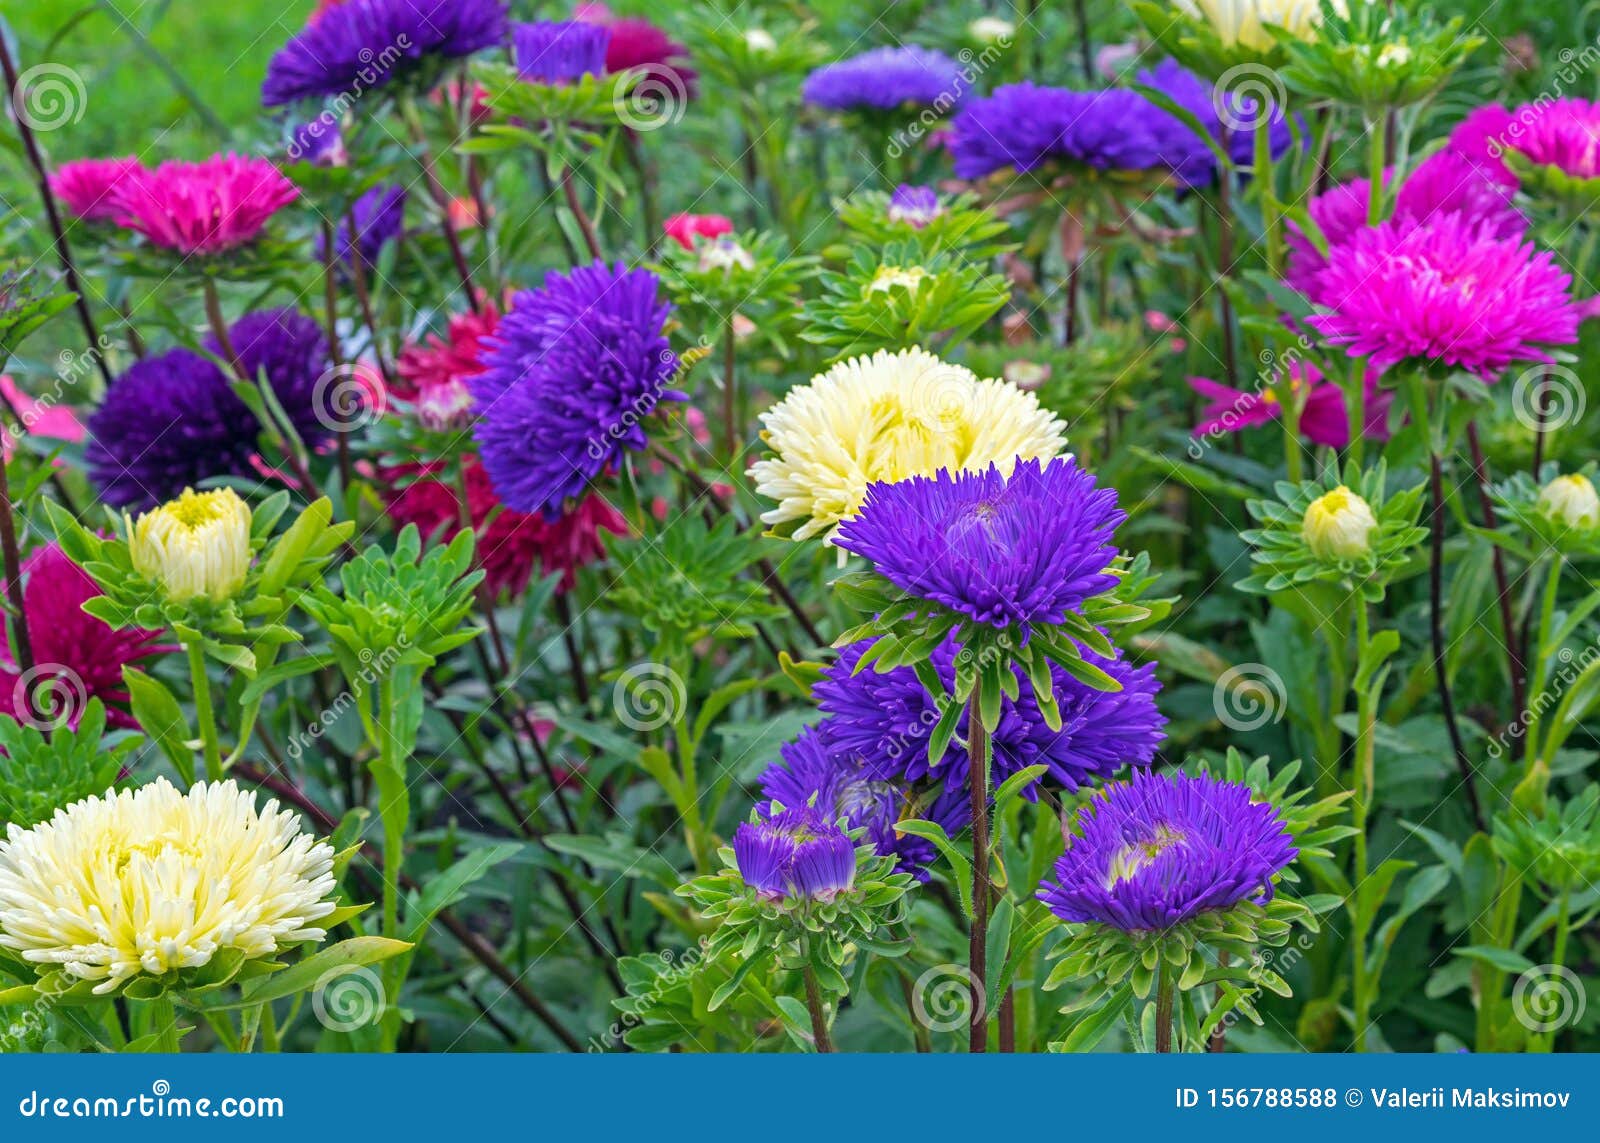 Aster Flowers Pink And Purple Asters On A Background Of Green Leaves Stock Photo Image Of Green Colorful 156788588